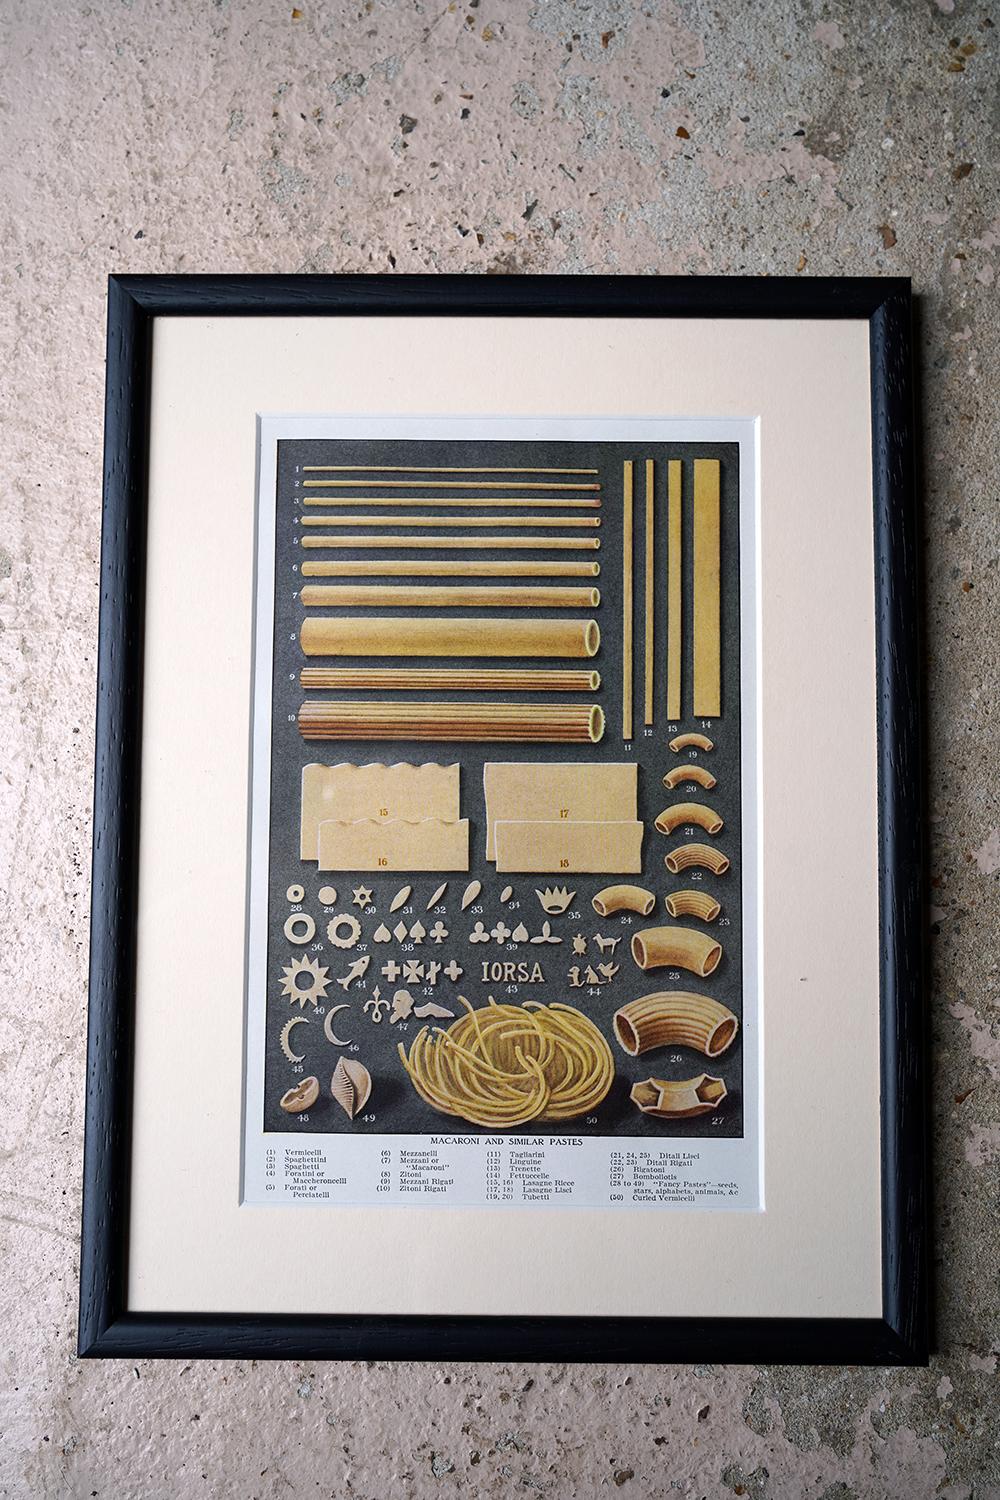 Six Framed Food Related Lithographs; 